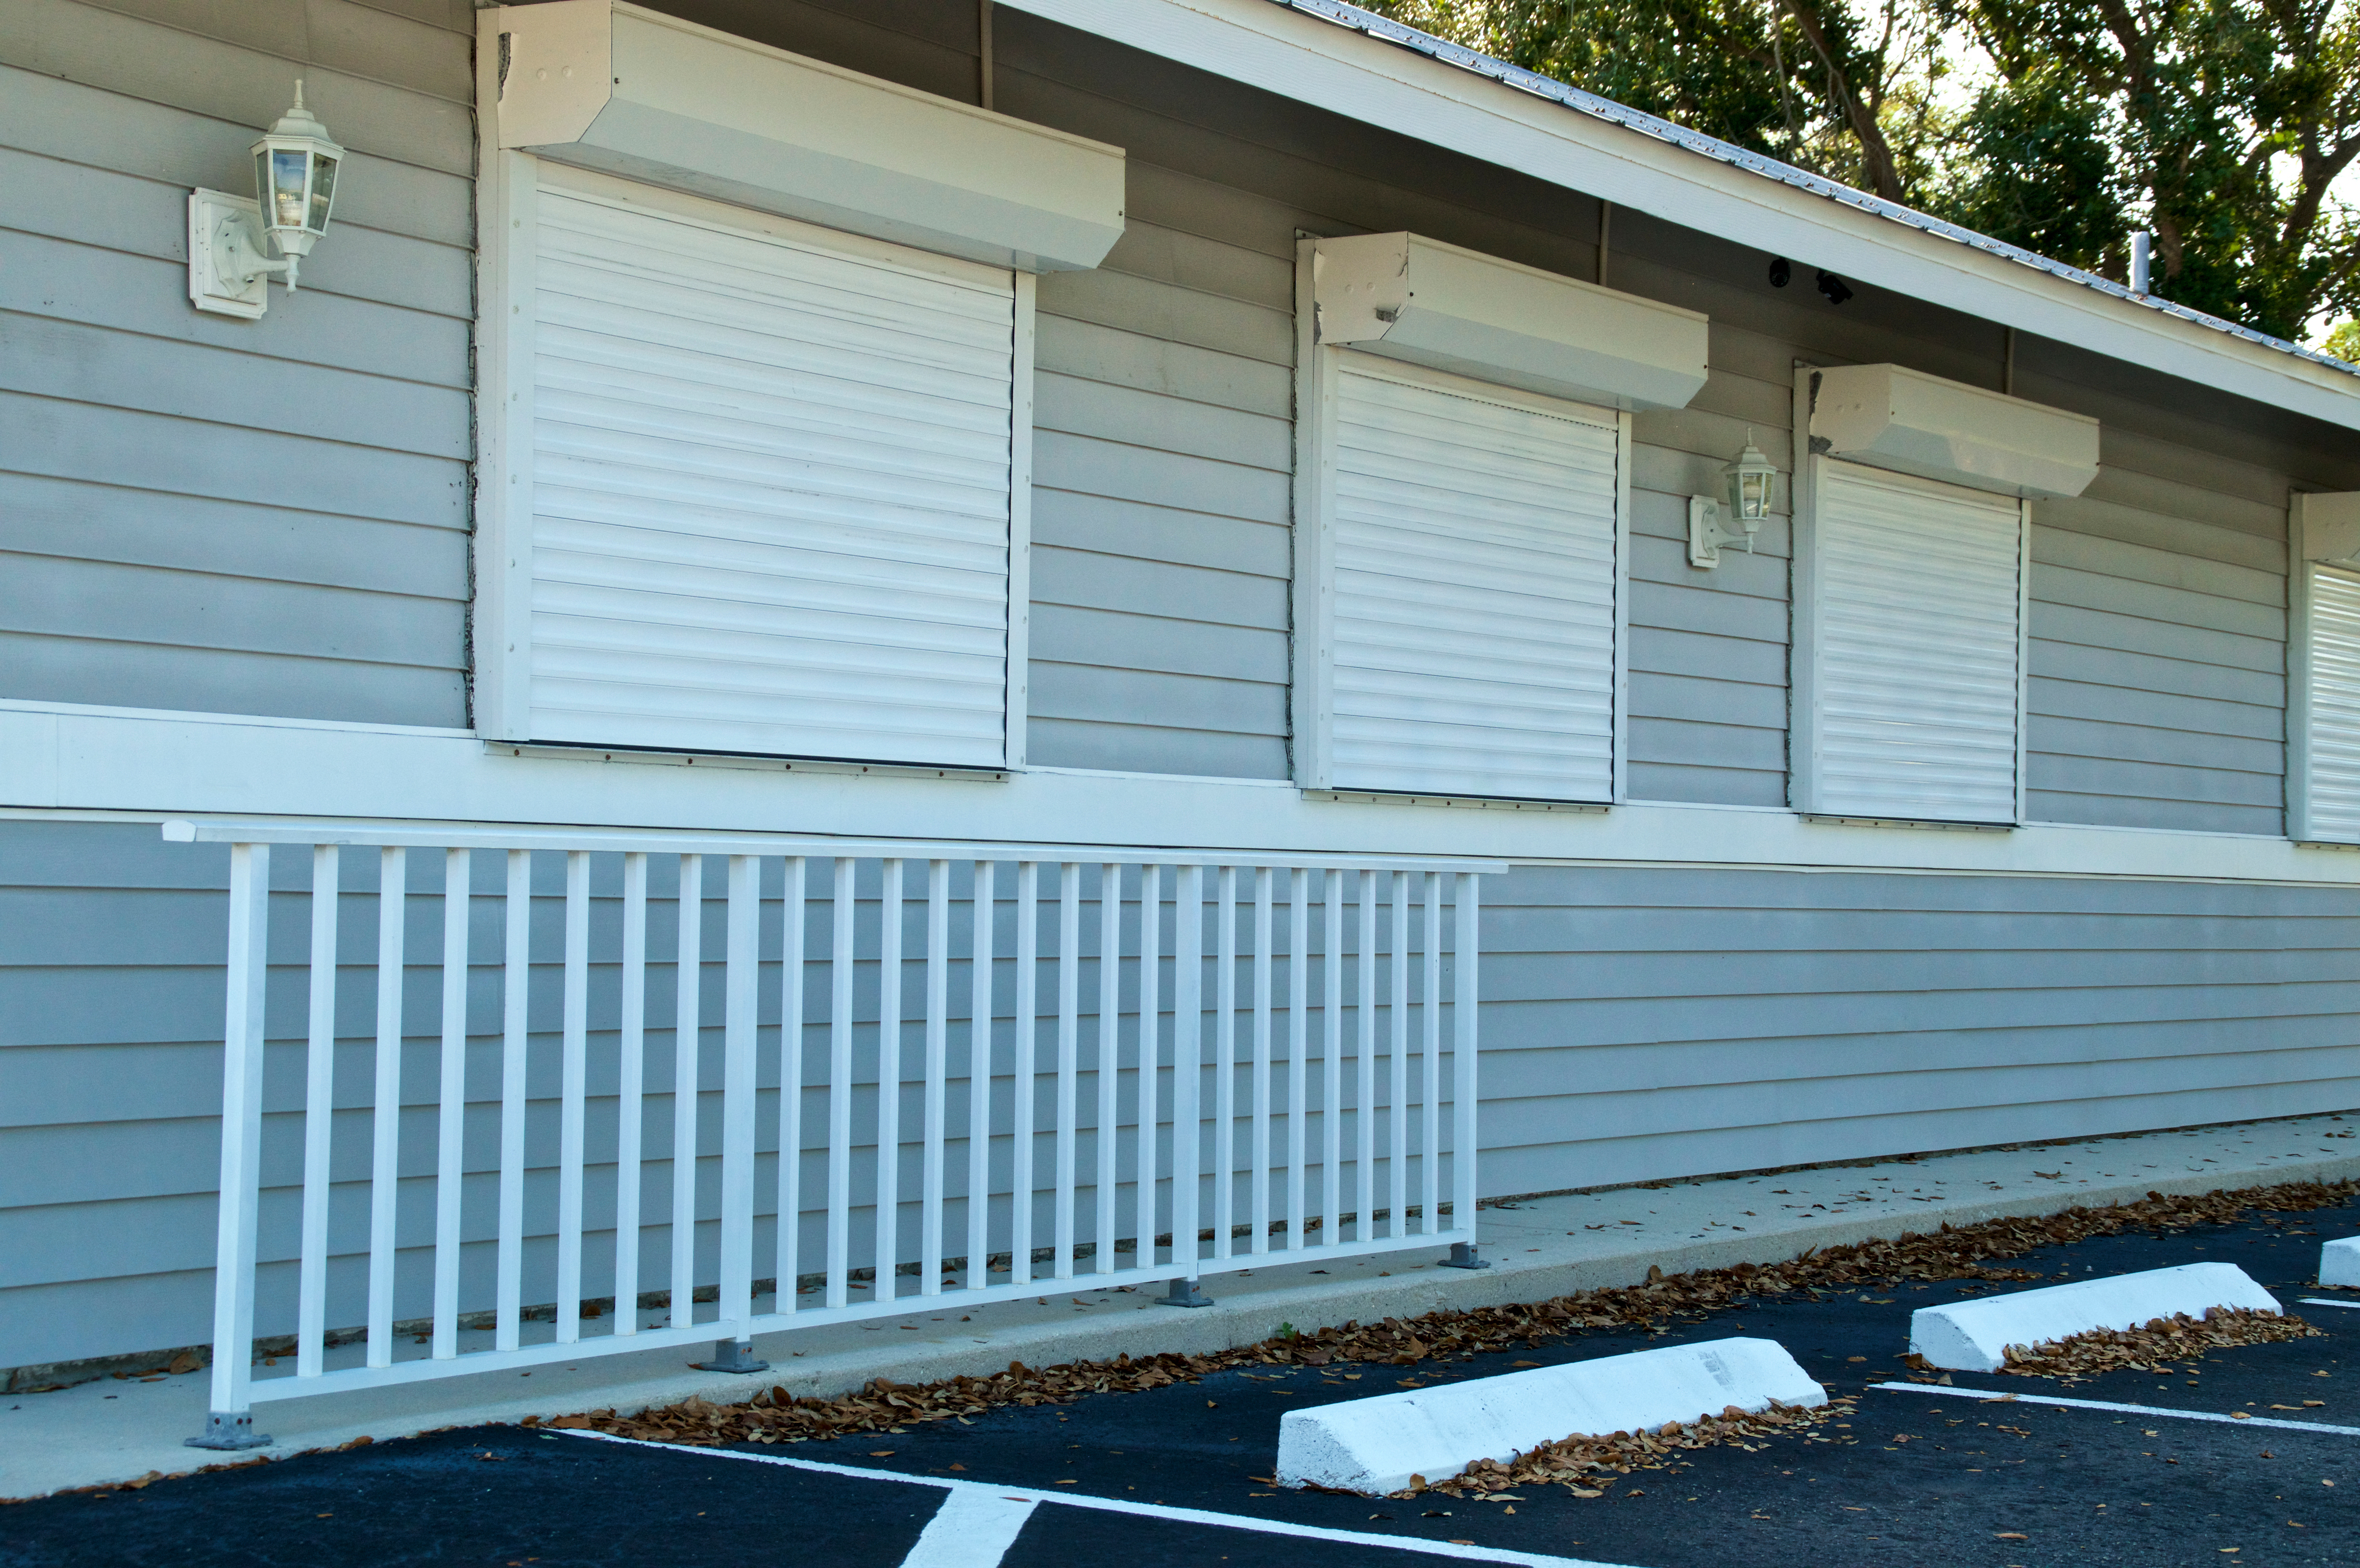 Strong, reliable hurricane shutters protecting windows - essential storm protection.